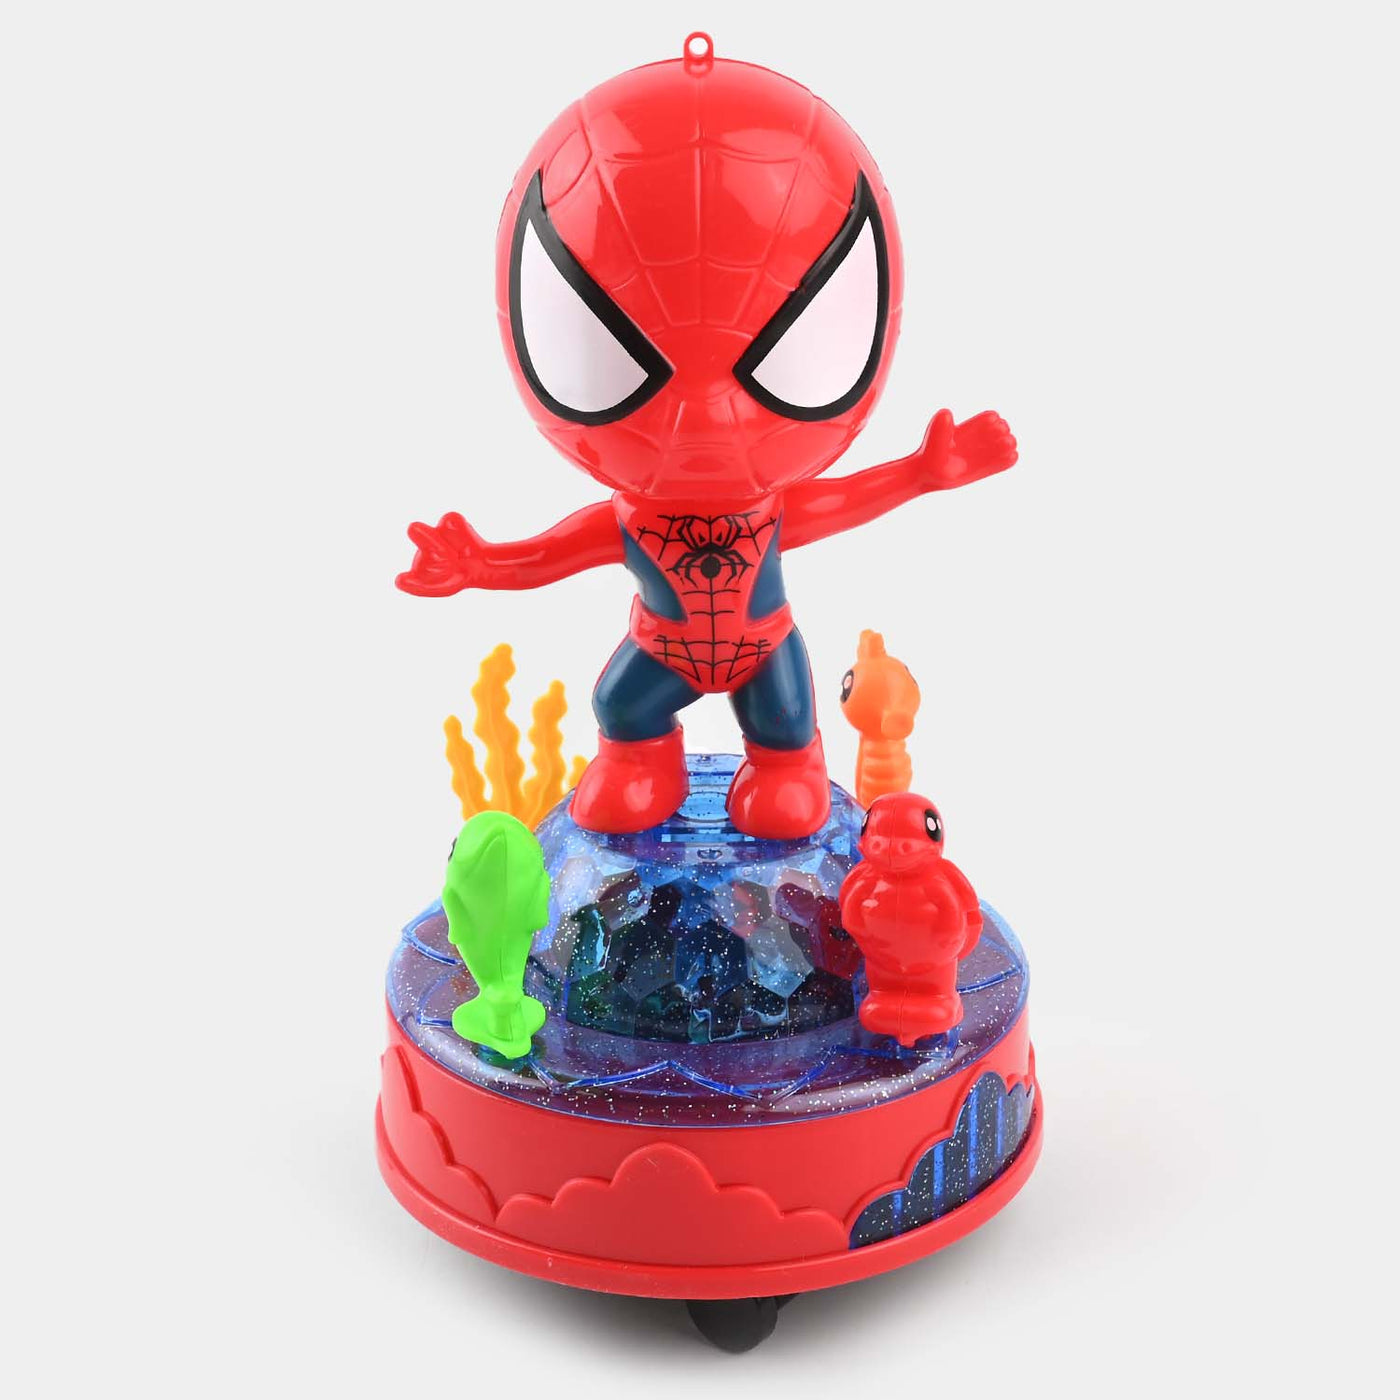 Character Hero Toy With Light & Music